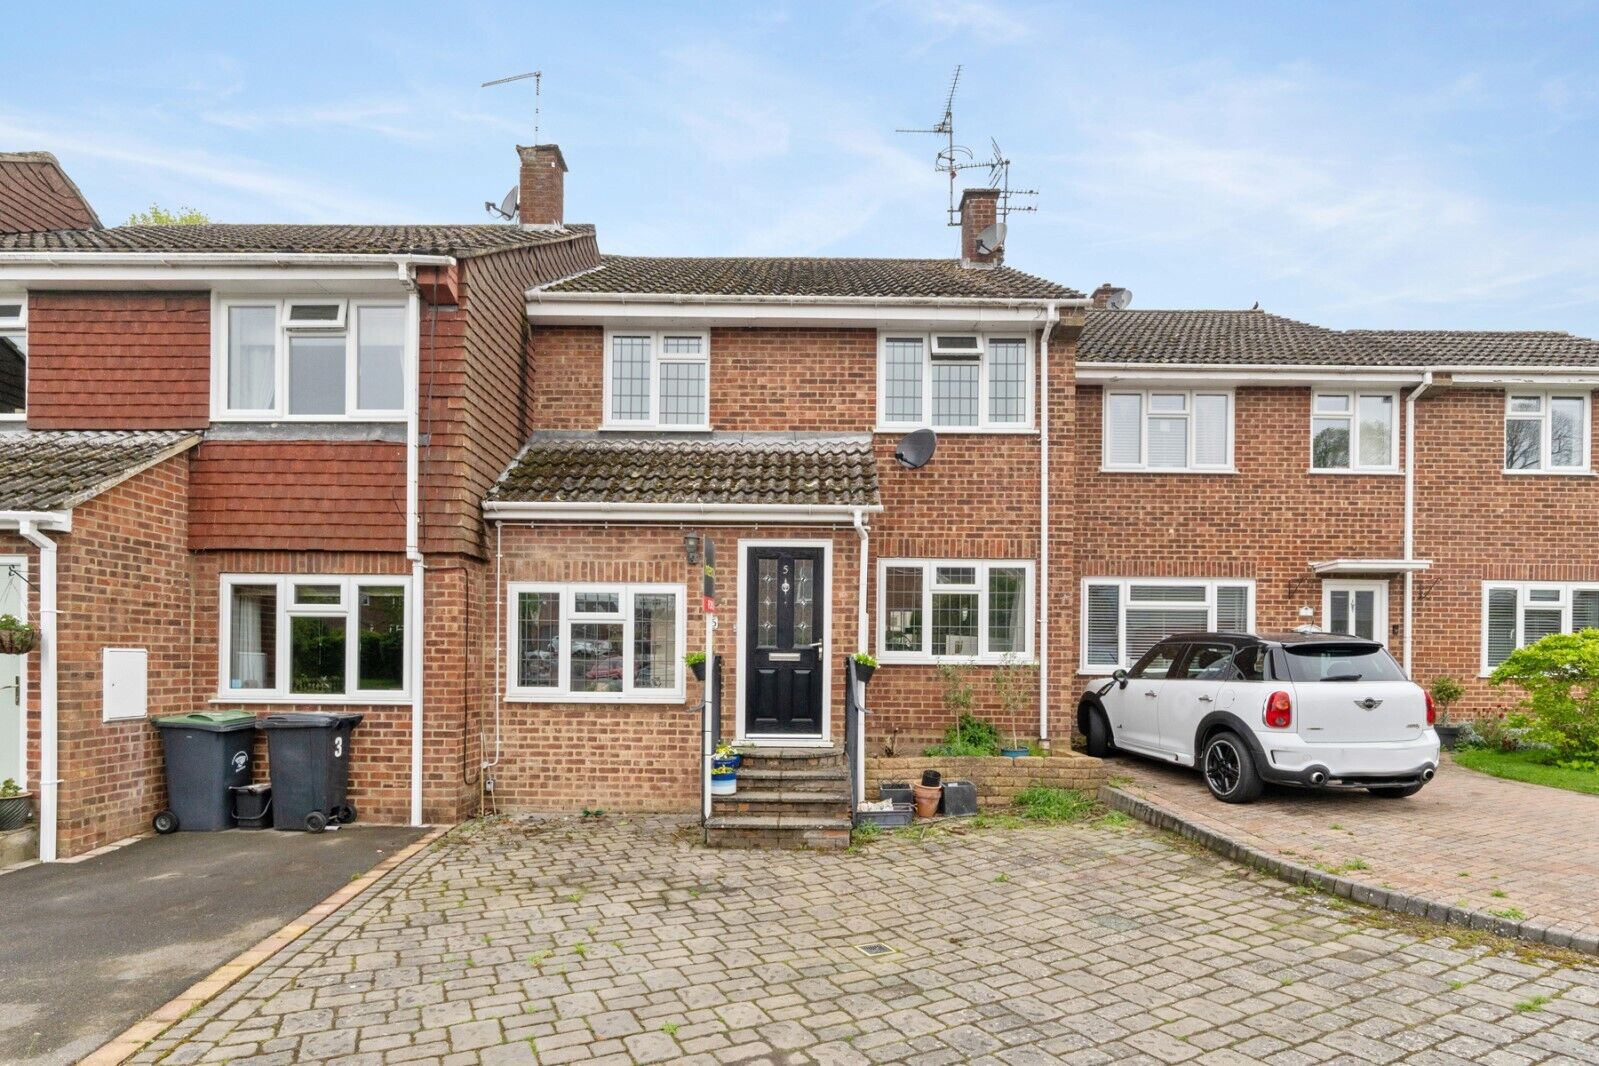 3 bedroom mid terraced house for sale Bentfield Gardens, Stansted, CM24, main image